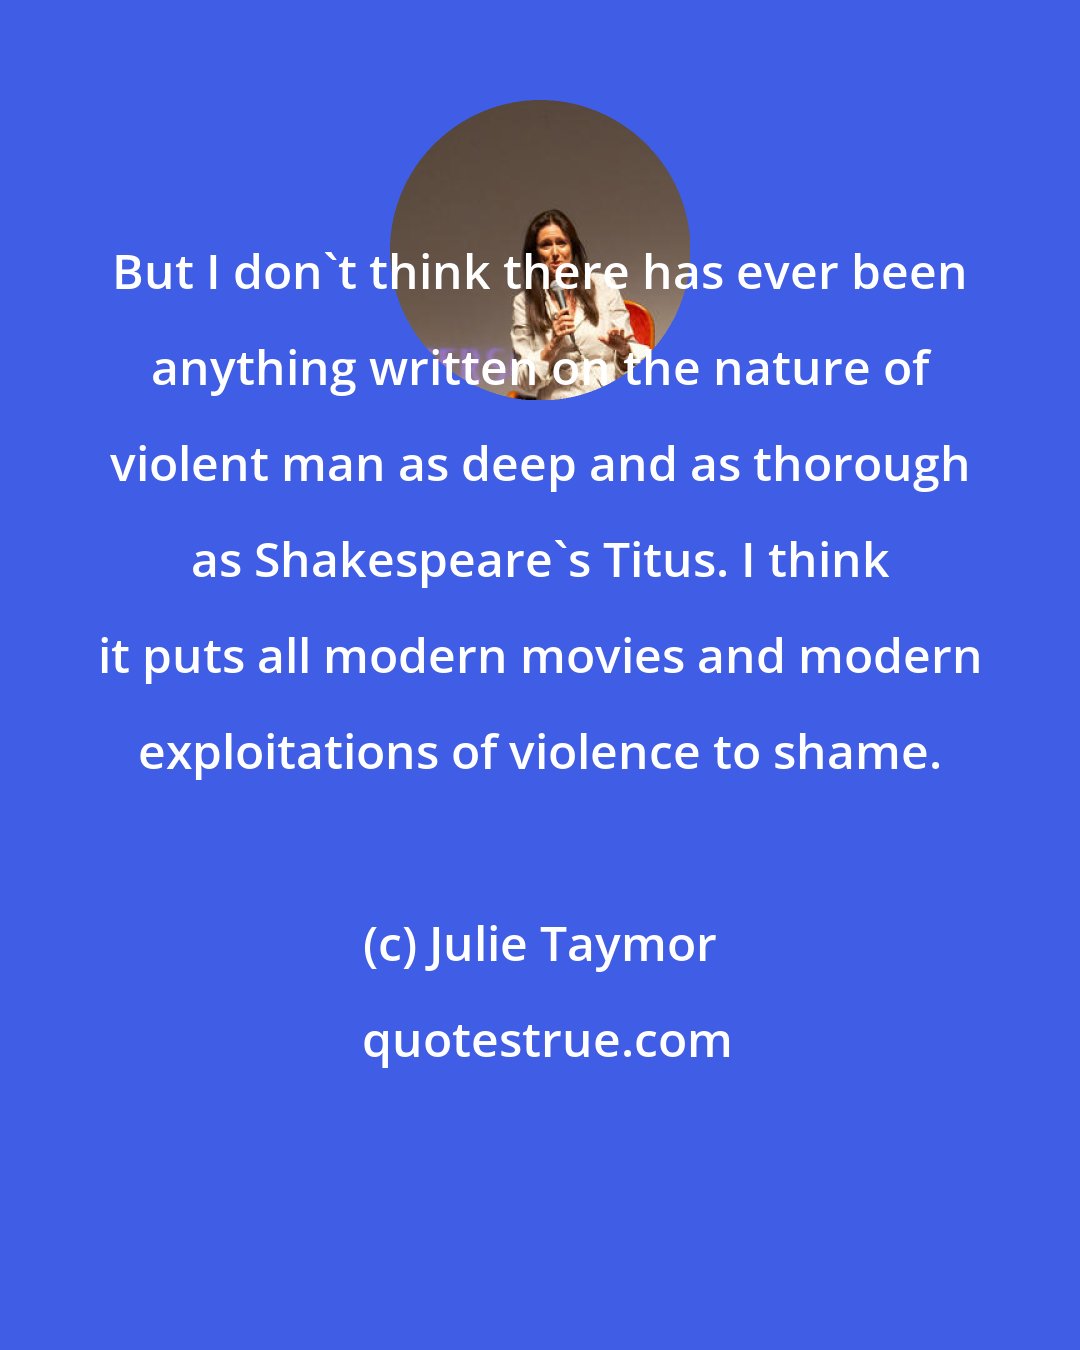 Julie Taymor: But I don't think there has ever been anything written on the nature of violent man as deep and as thorough as Shakespeare's Titus. I think it puts all modern movies and modern exploitations of violence to shame.